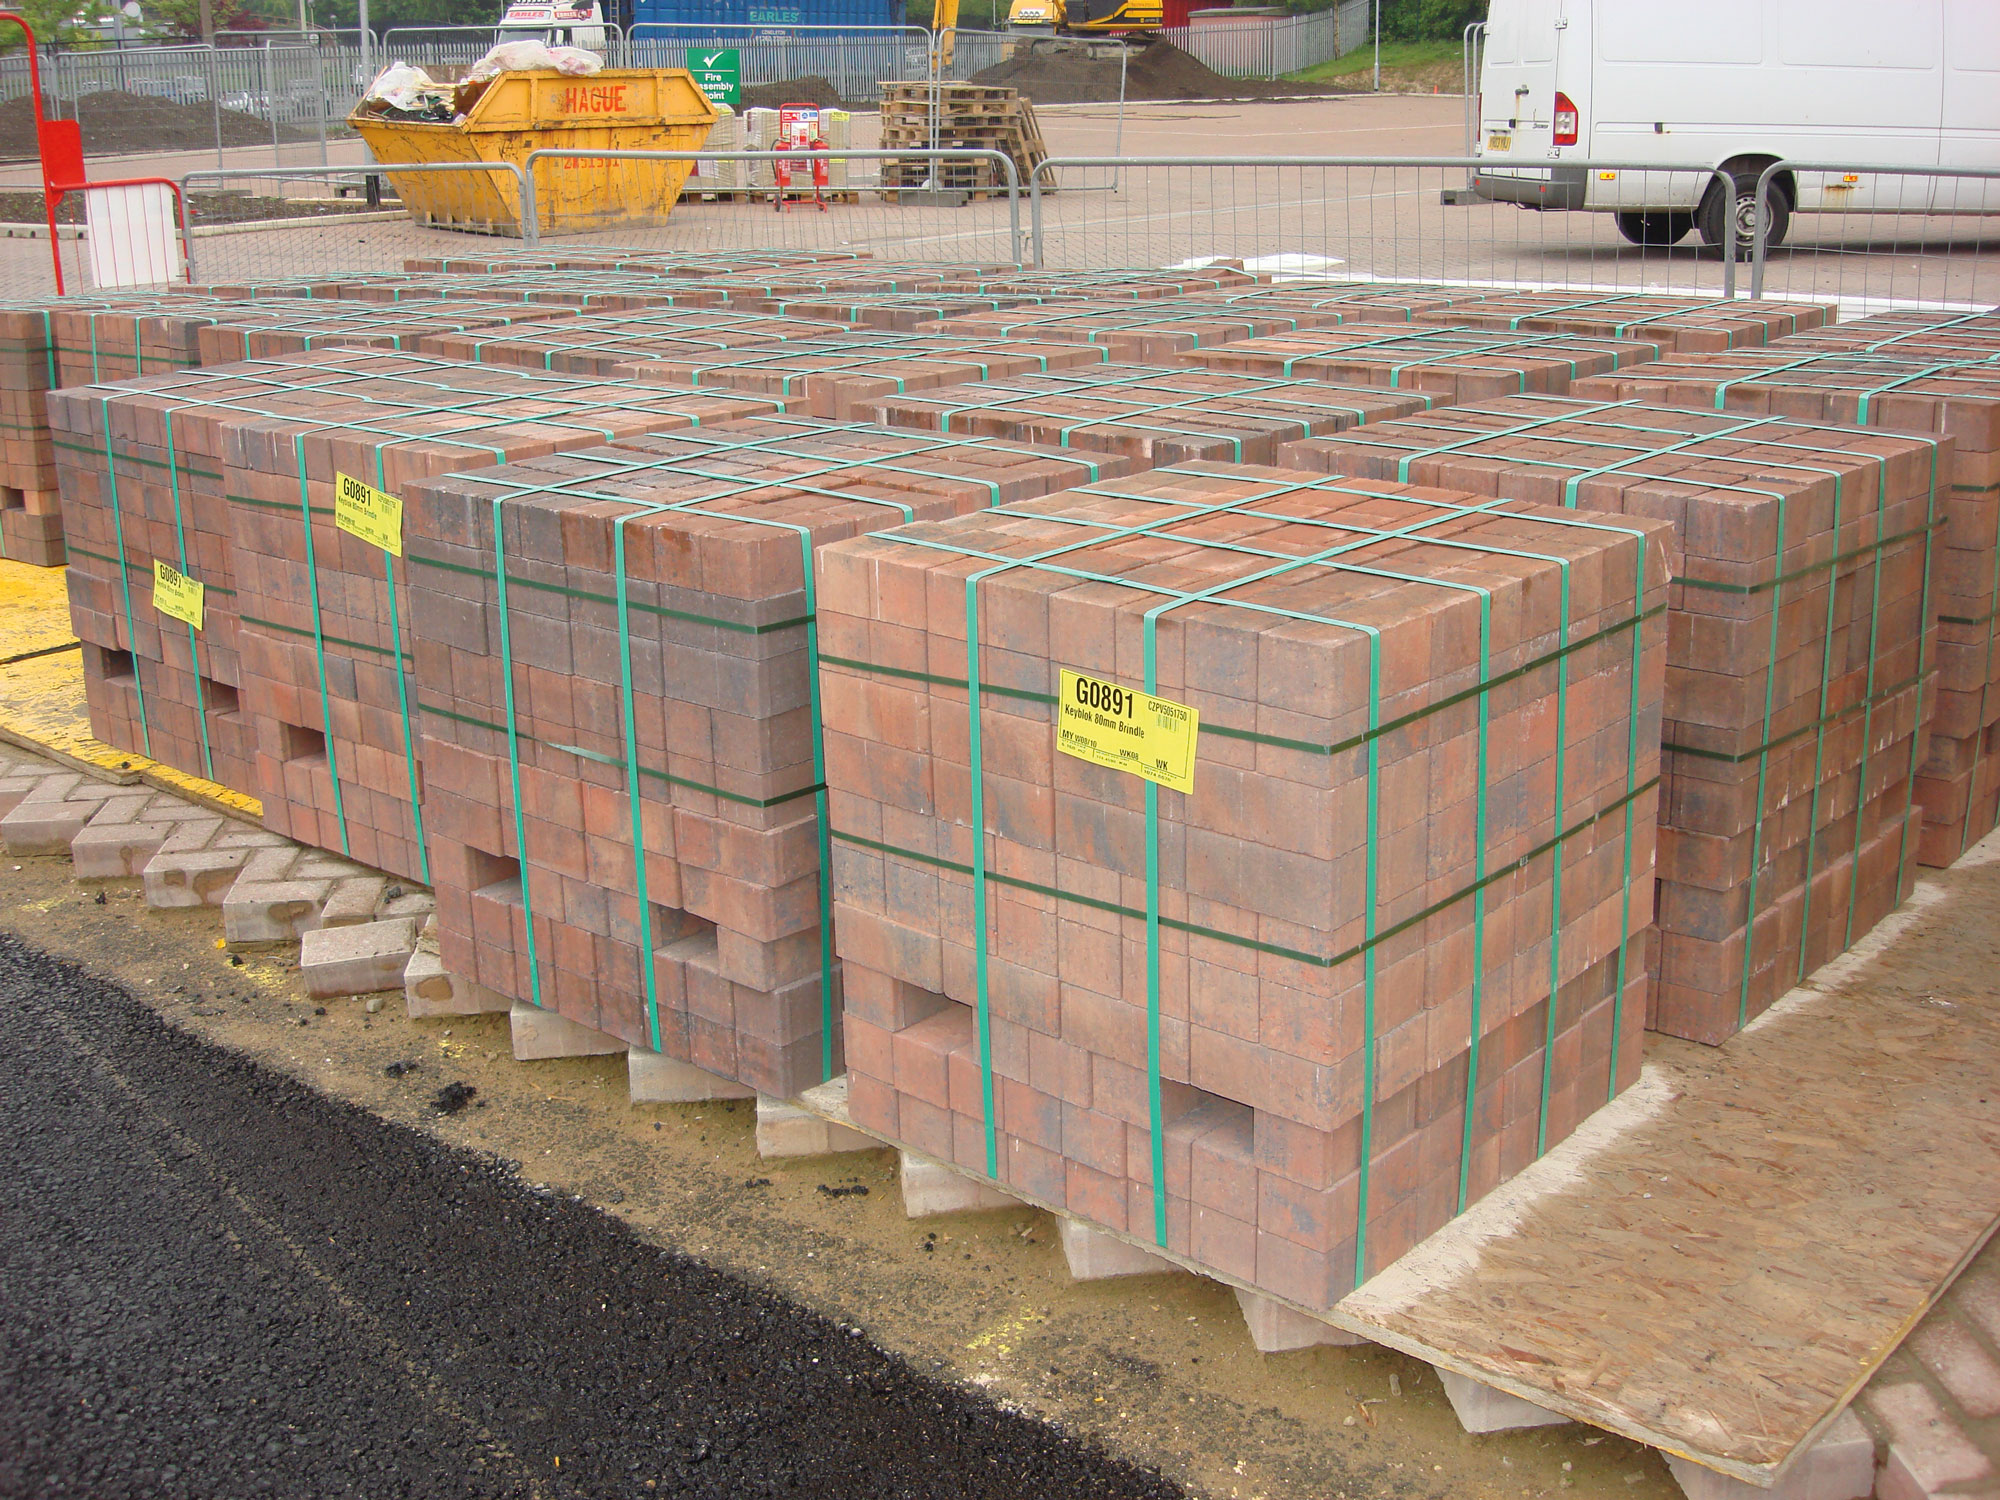 Pallet of bricks for building project